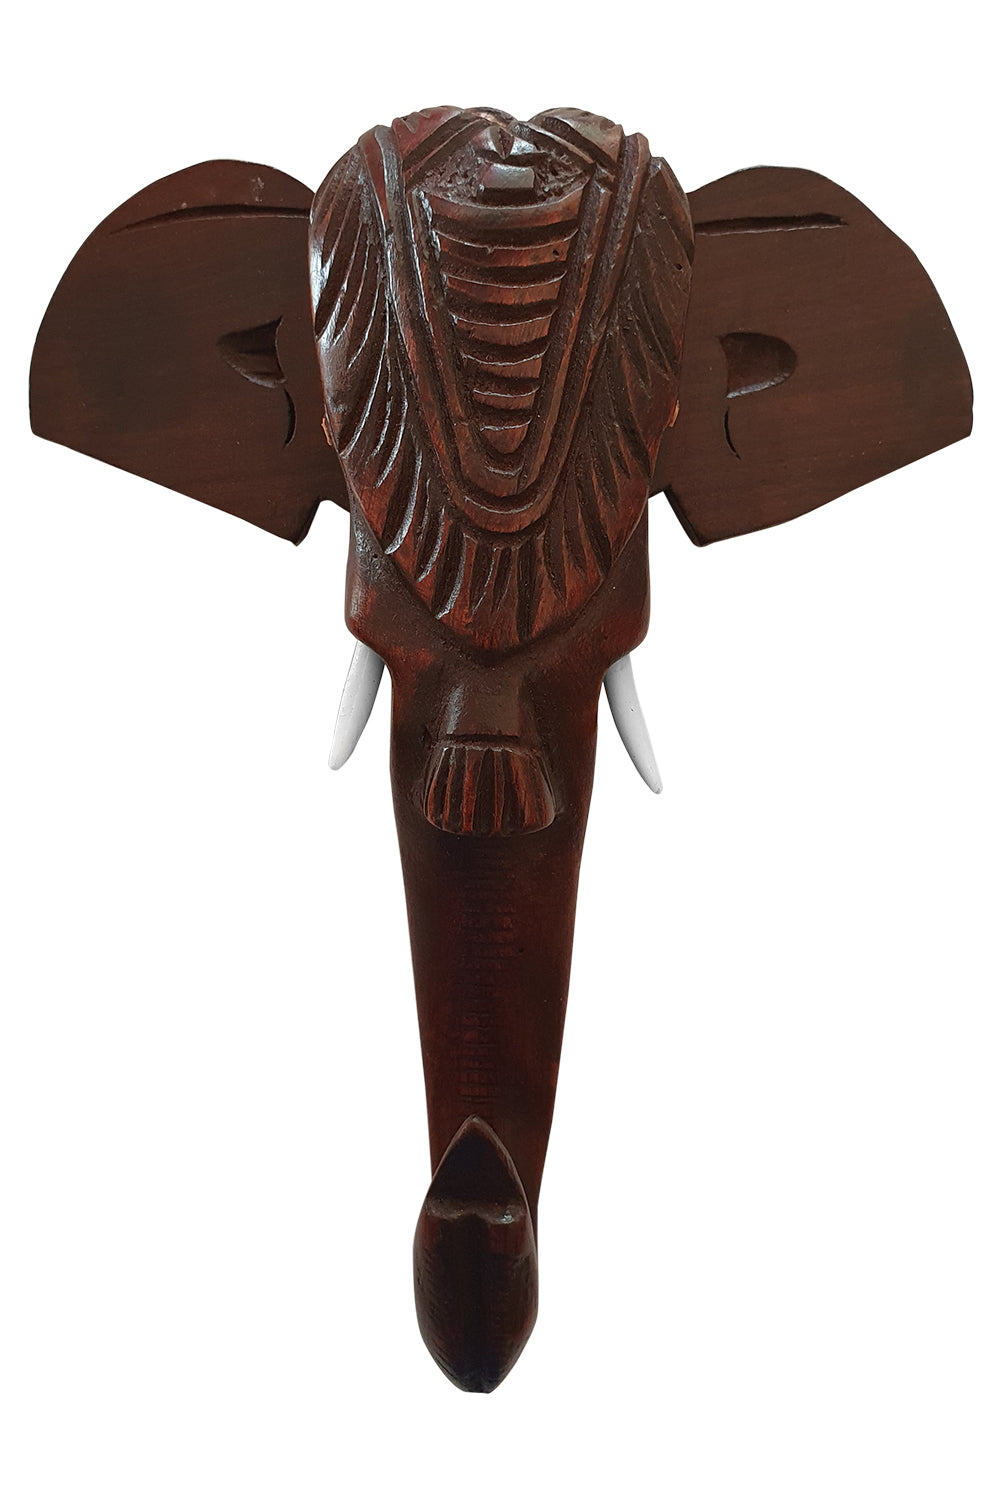 Southloom Handmade Elephant Head with Carved Patterns Handicraft (Carved from Mahogany Wood) 8 Inches